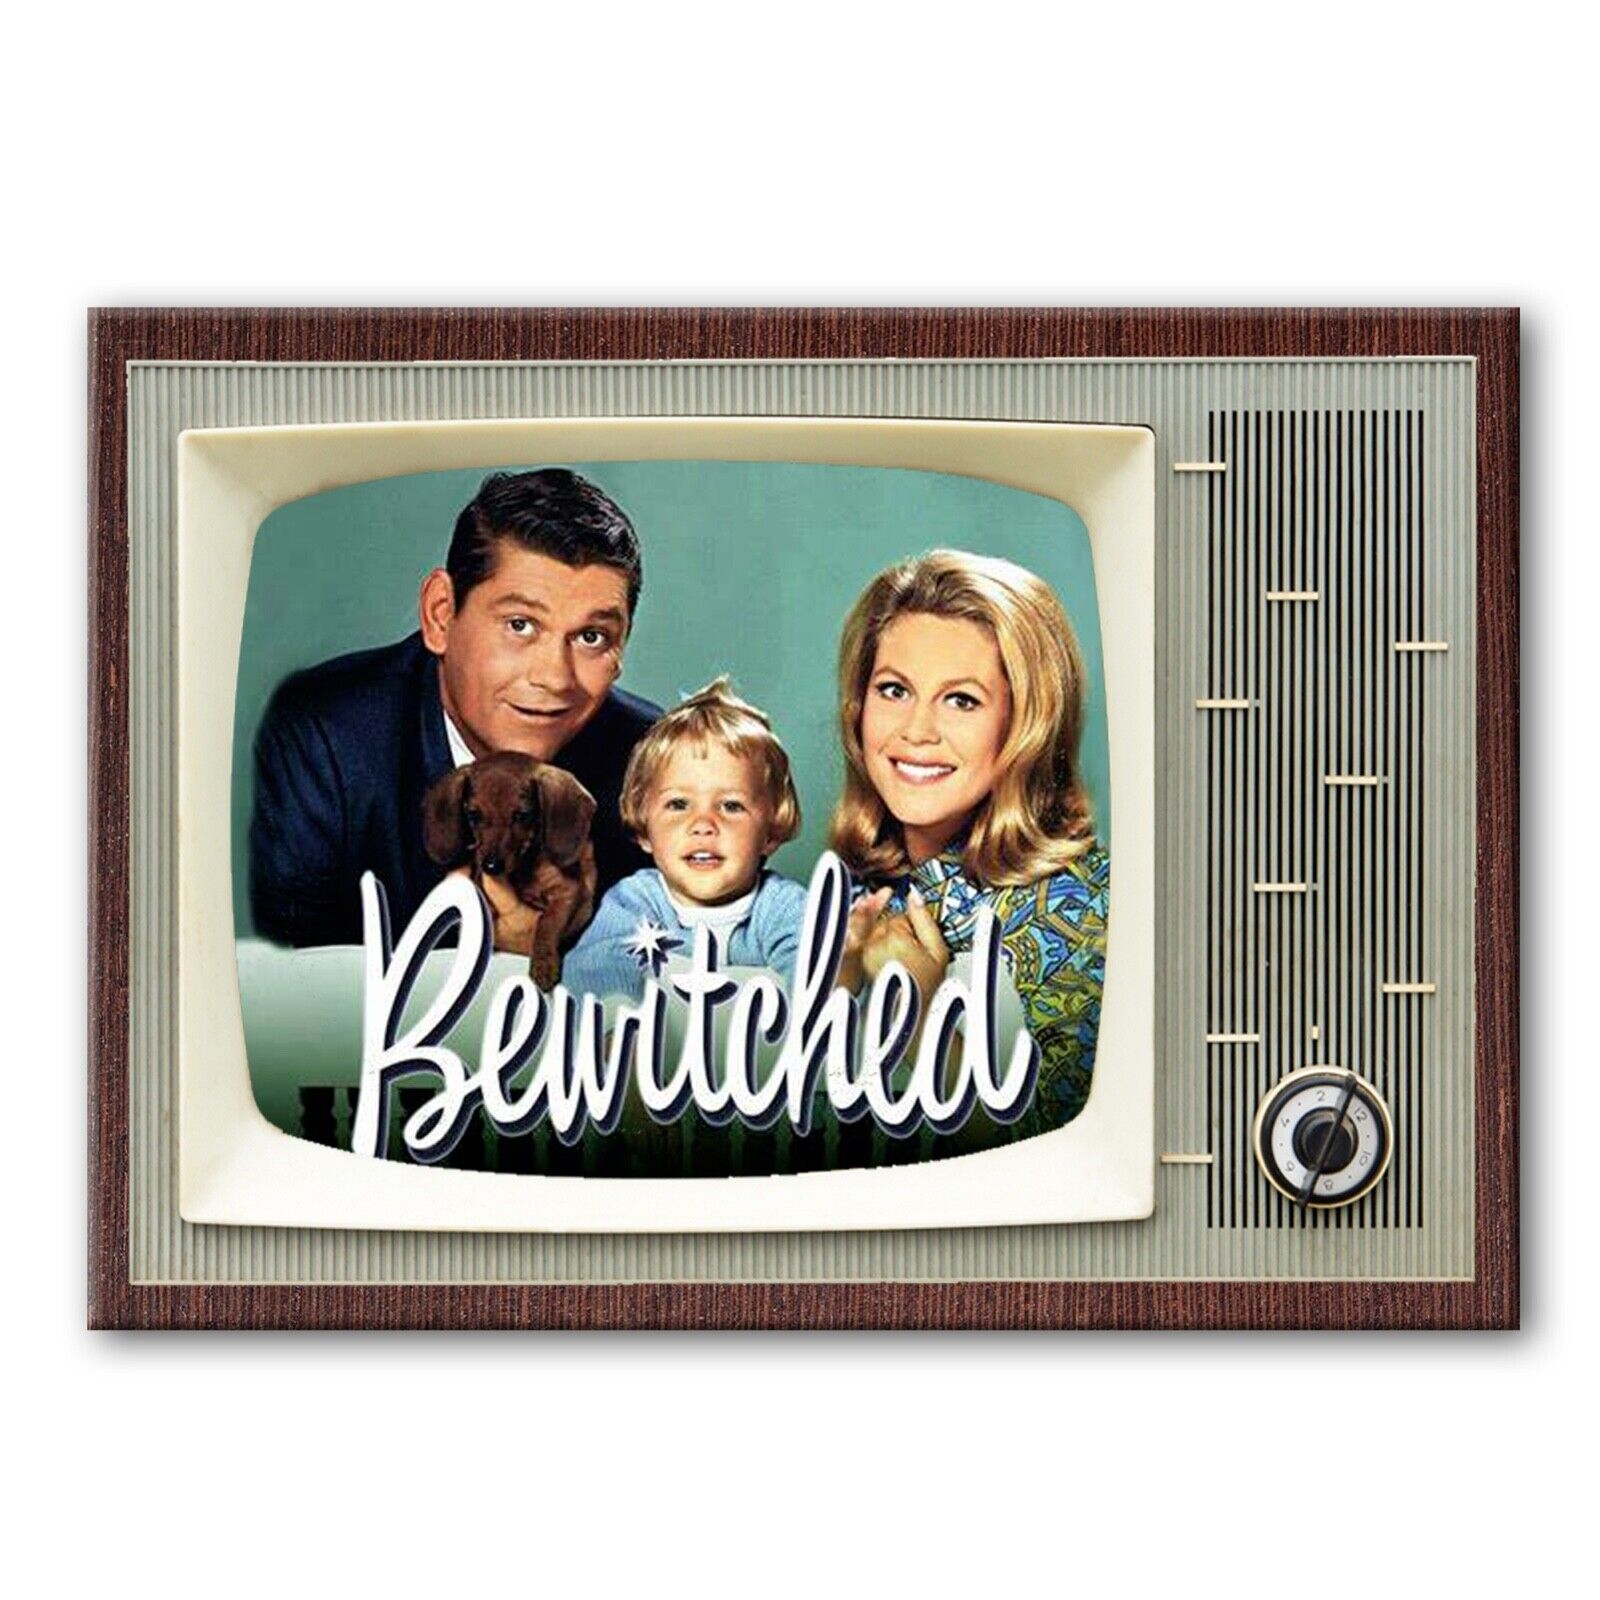 Bewitched TV Show Classic TV 3.5 inches x 2.5 inches Steel Fridge Magnet